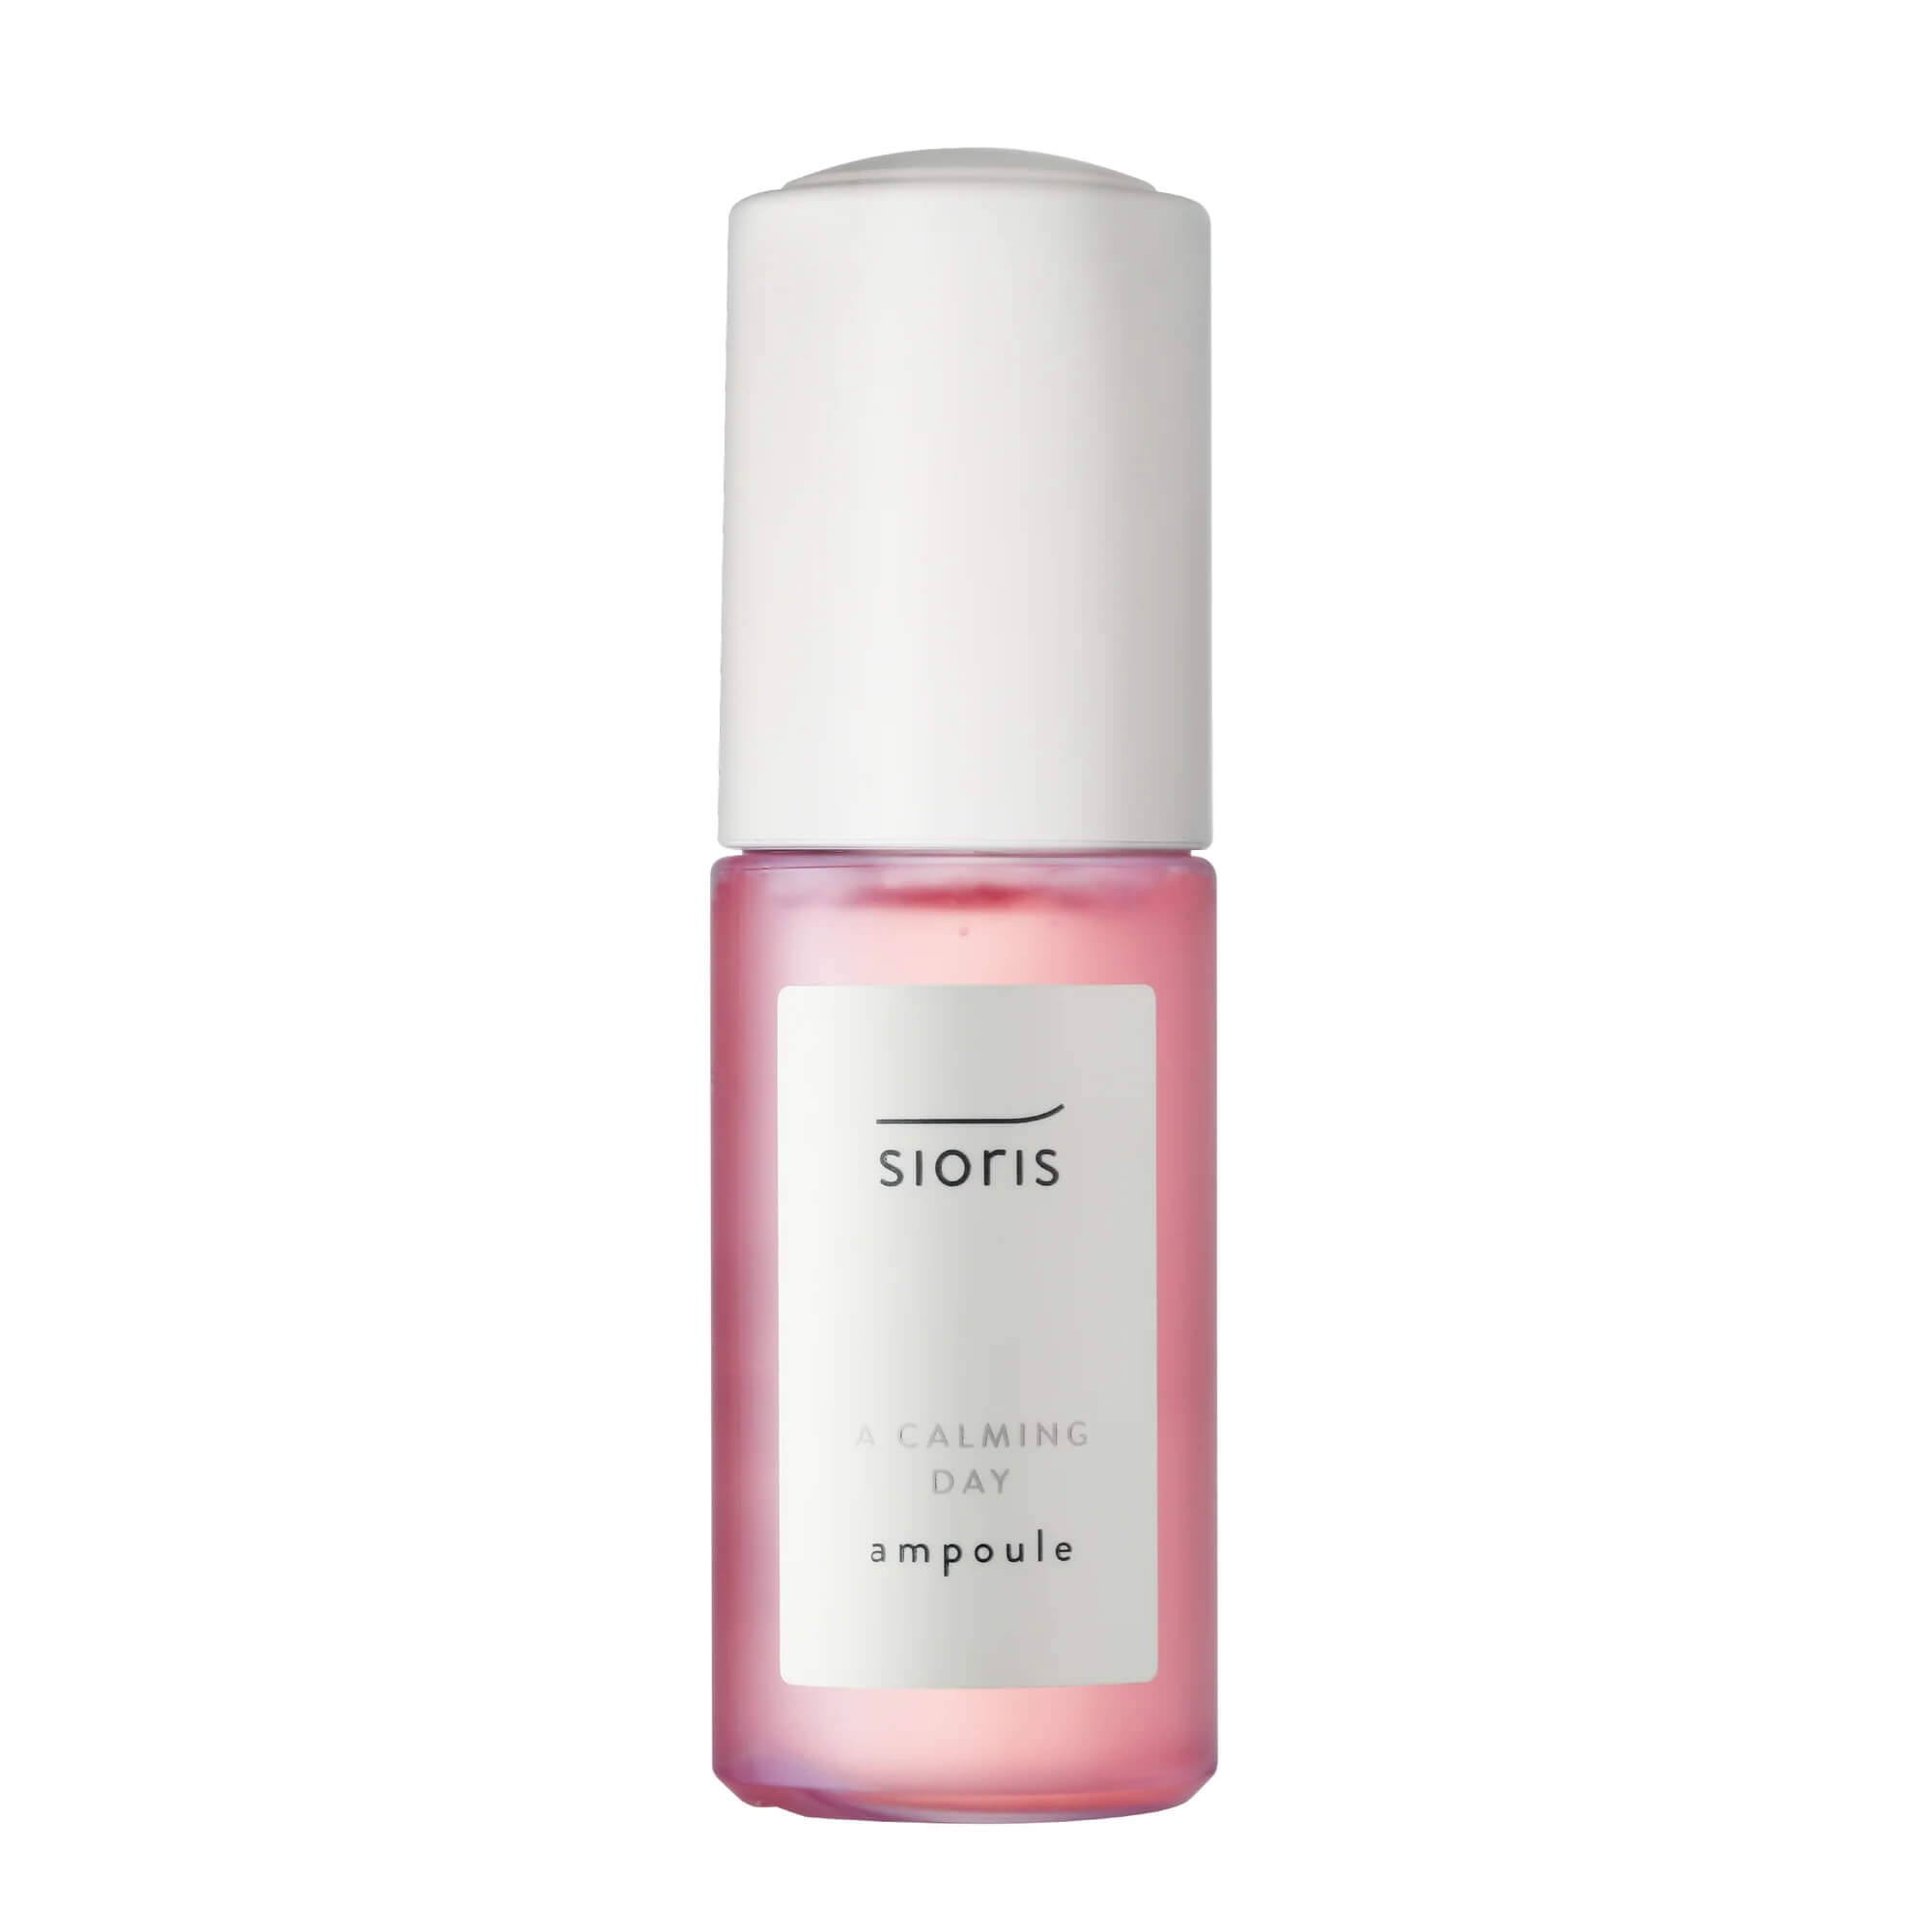 Sioris A Calming Day Ampoule 35 ml